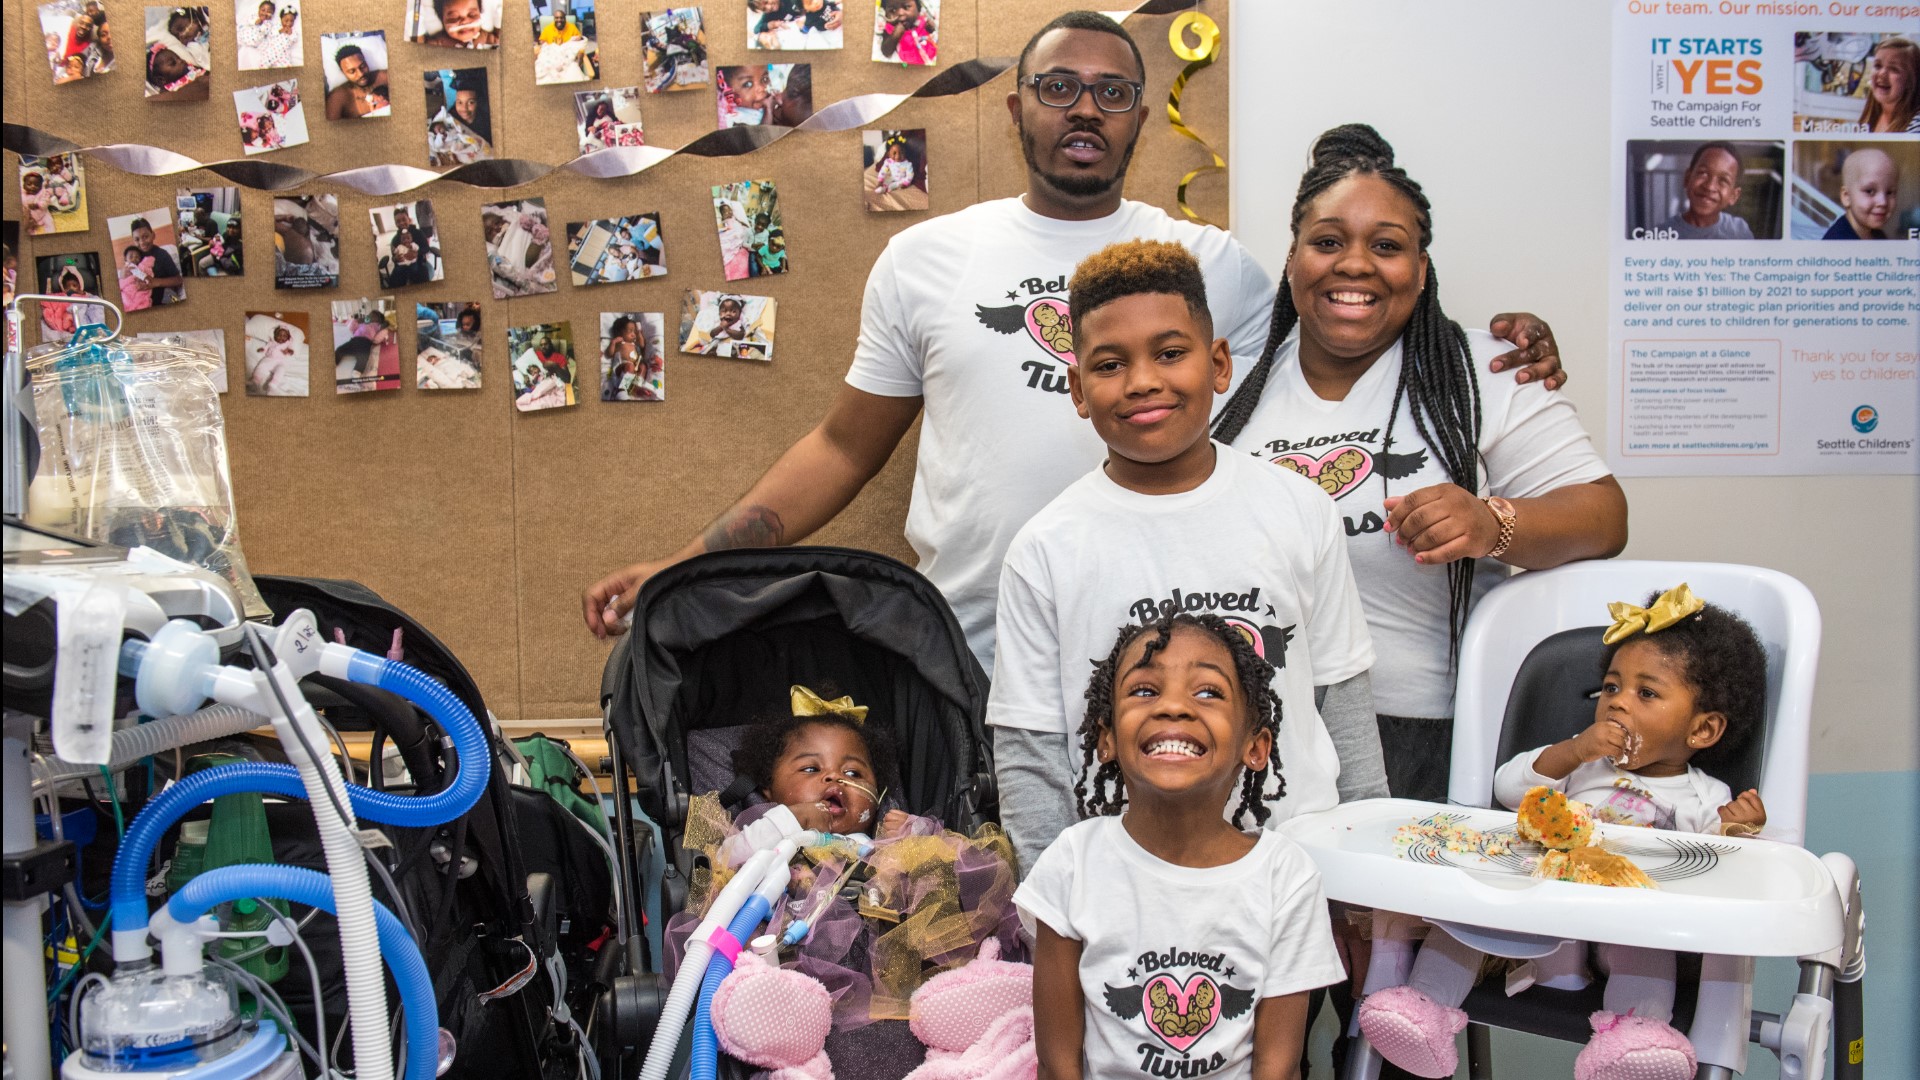 Amani Jackson has spent the first year of her life in the hospital after being diagnosed with a rare birth defect. This story brought to you by Seattle Children's Hospital.